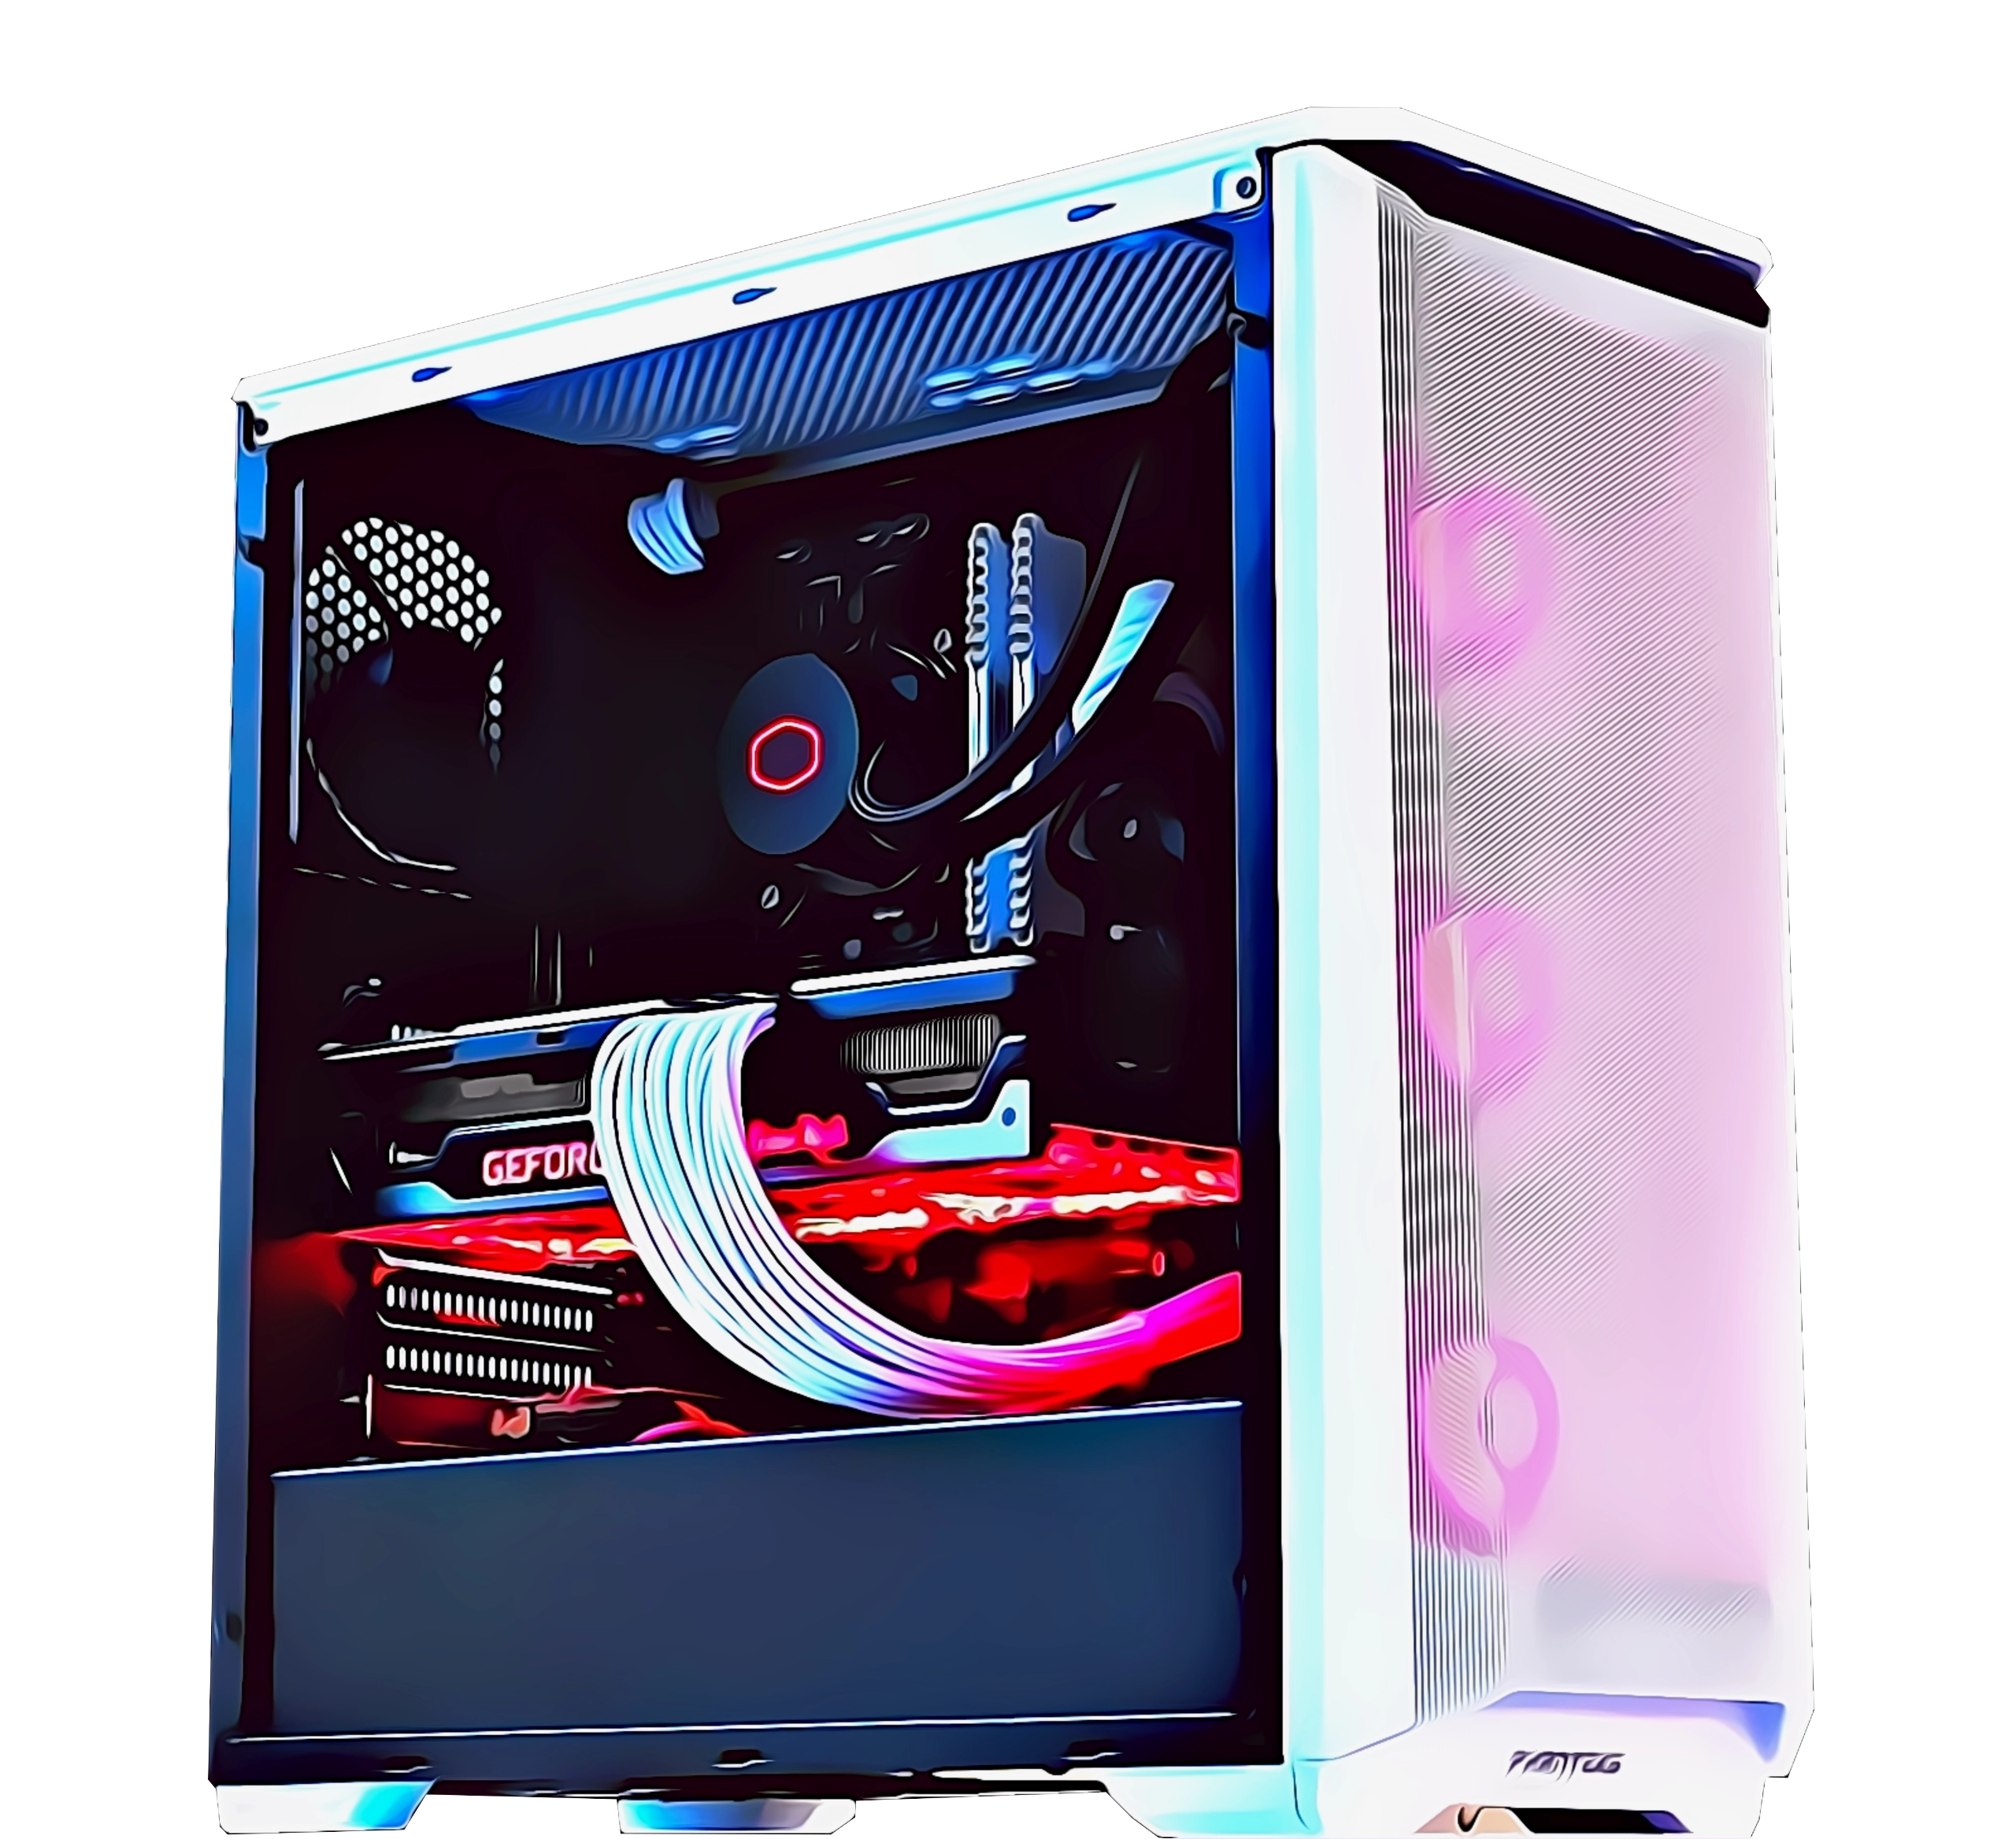 Range of gaming computers at different prices and spec. Entry-level models for casual gaming and everyday tasks. Mid-range and high-end systems for demanding gamers, running the latest games at high settings. Custom-build options available.